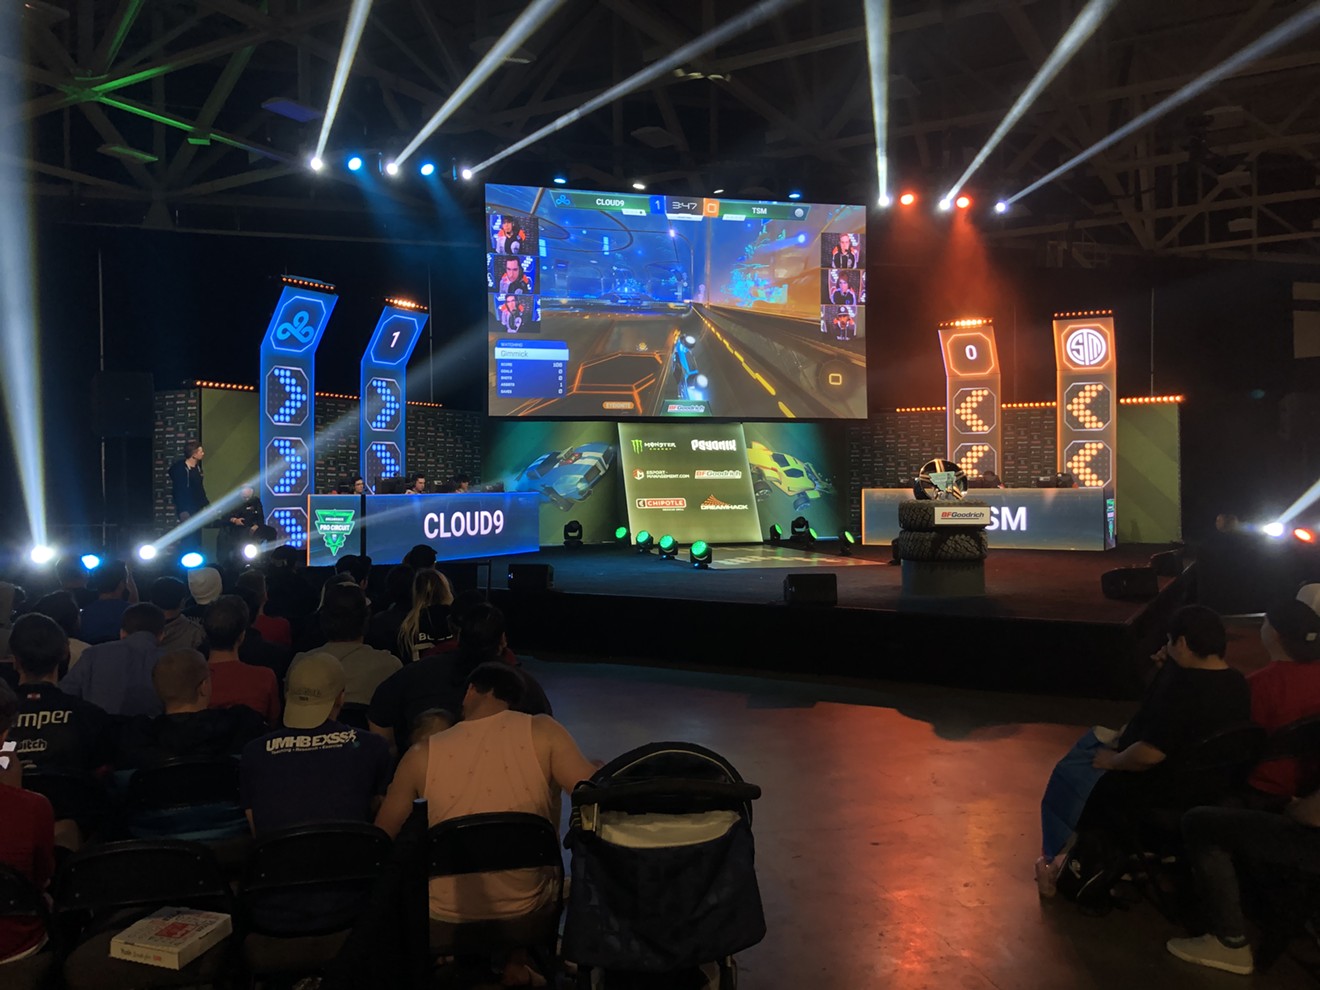 Two pro-esports teams face off in a round of Rocket League during the 2019 Dreamhack tournament at the Kay Bailey Hutchison Convention Center.